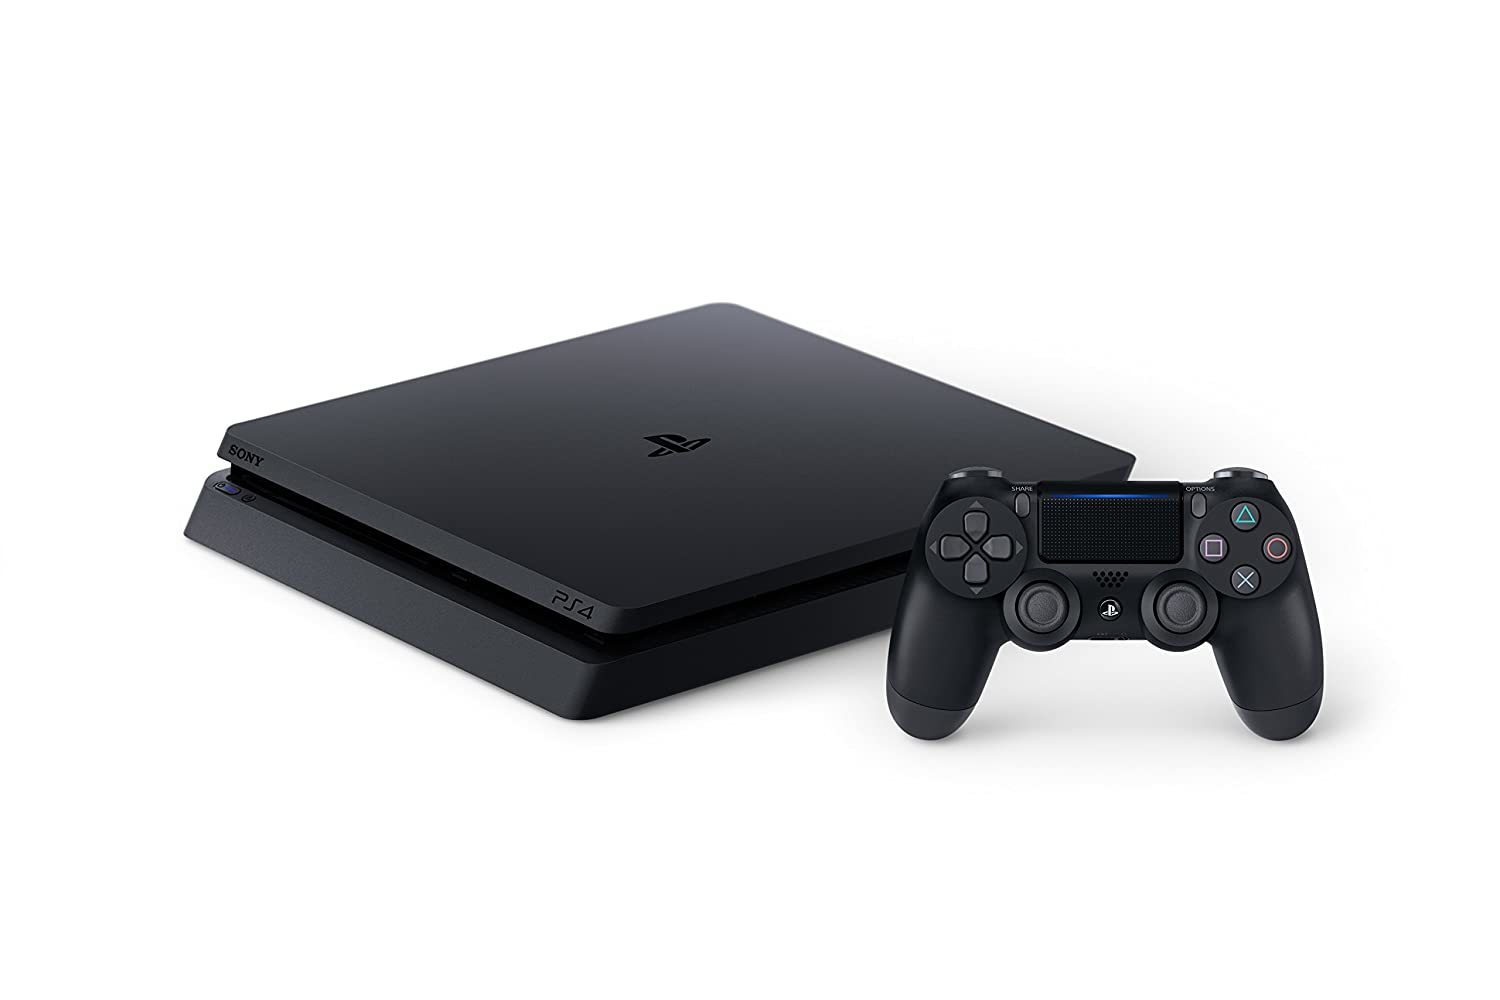 Primary image for PlayStation 4 Slim 500GB Console [Discontinued]